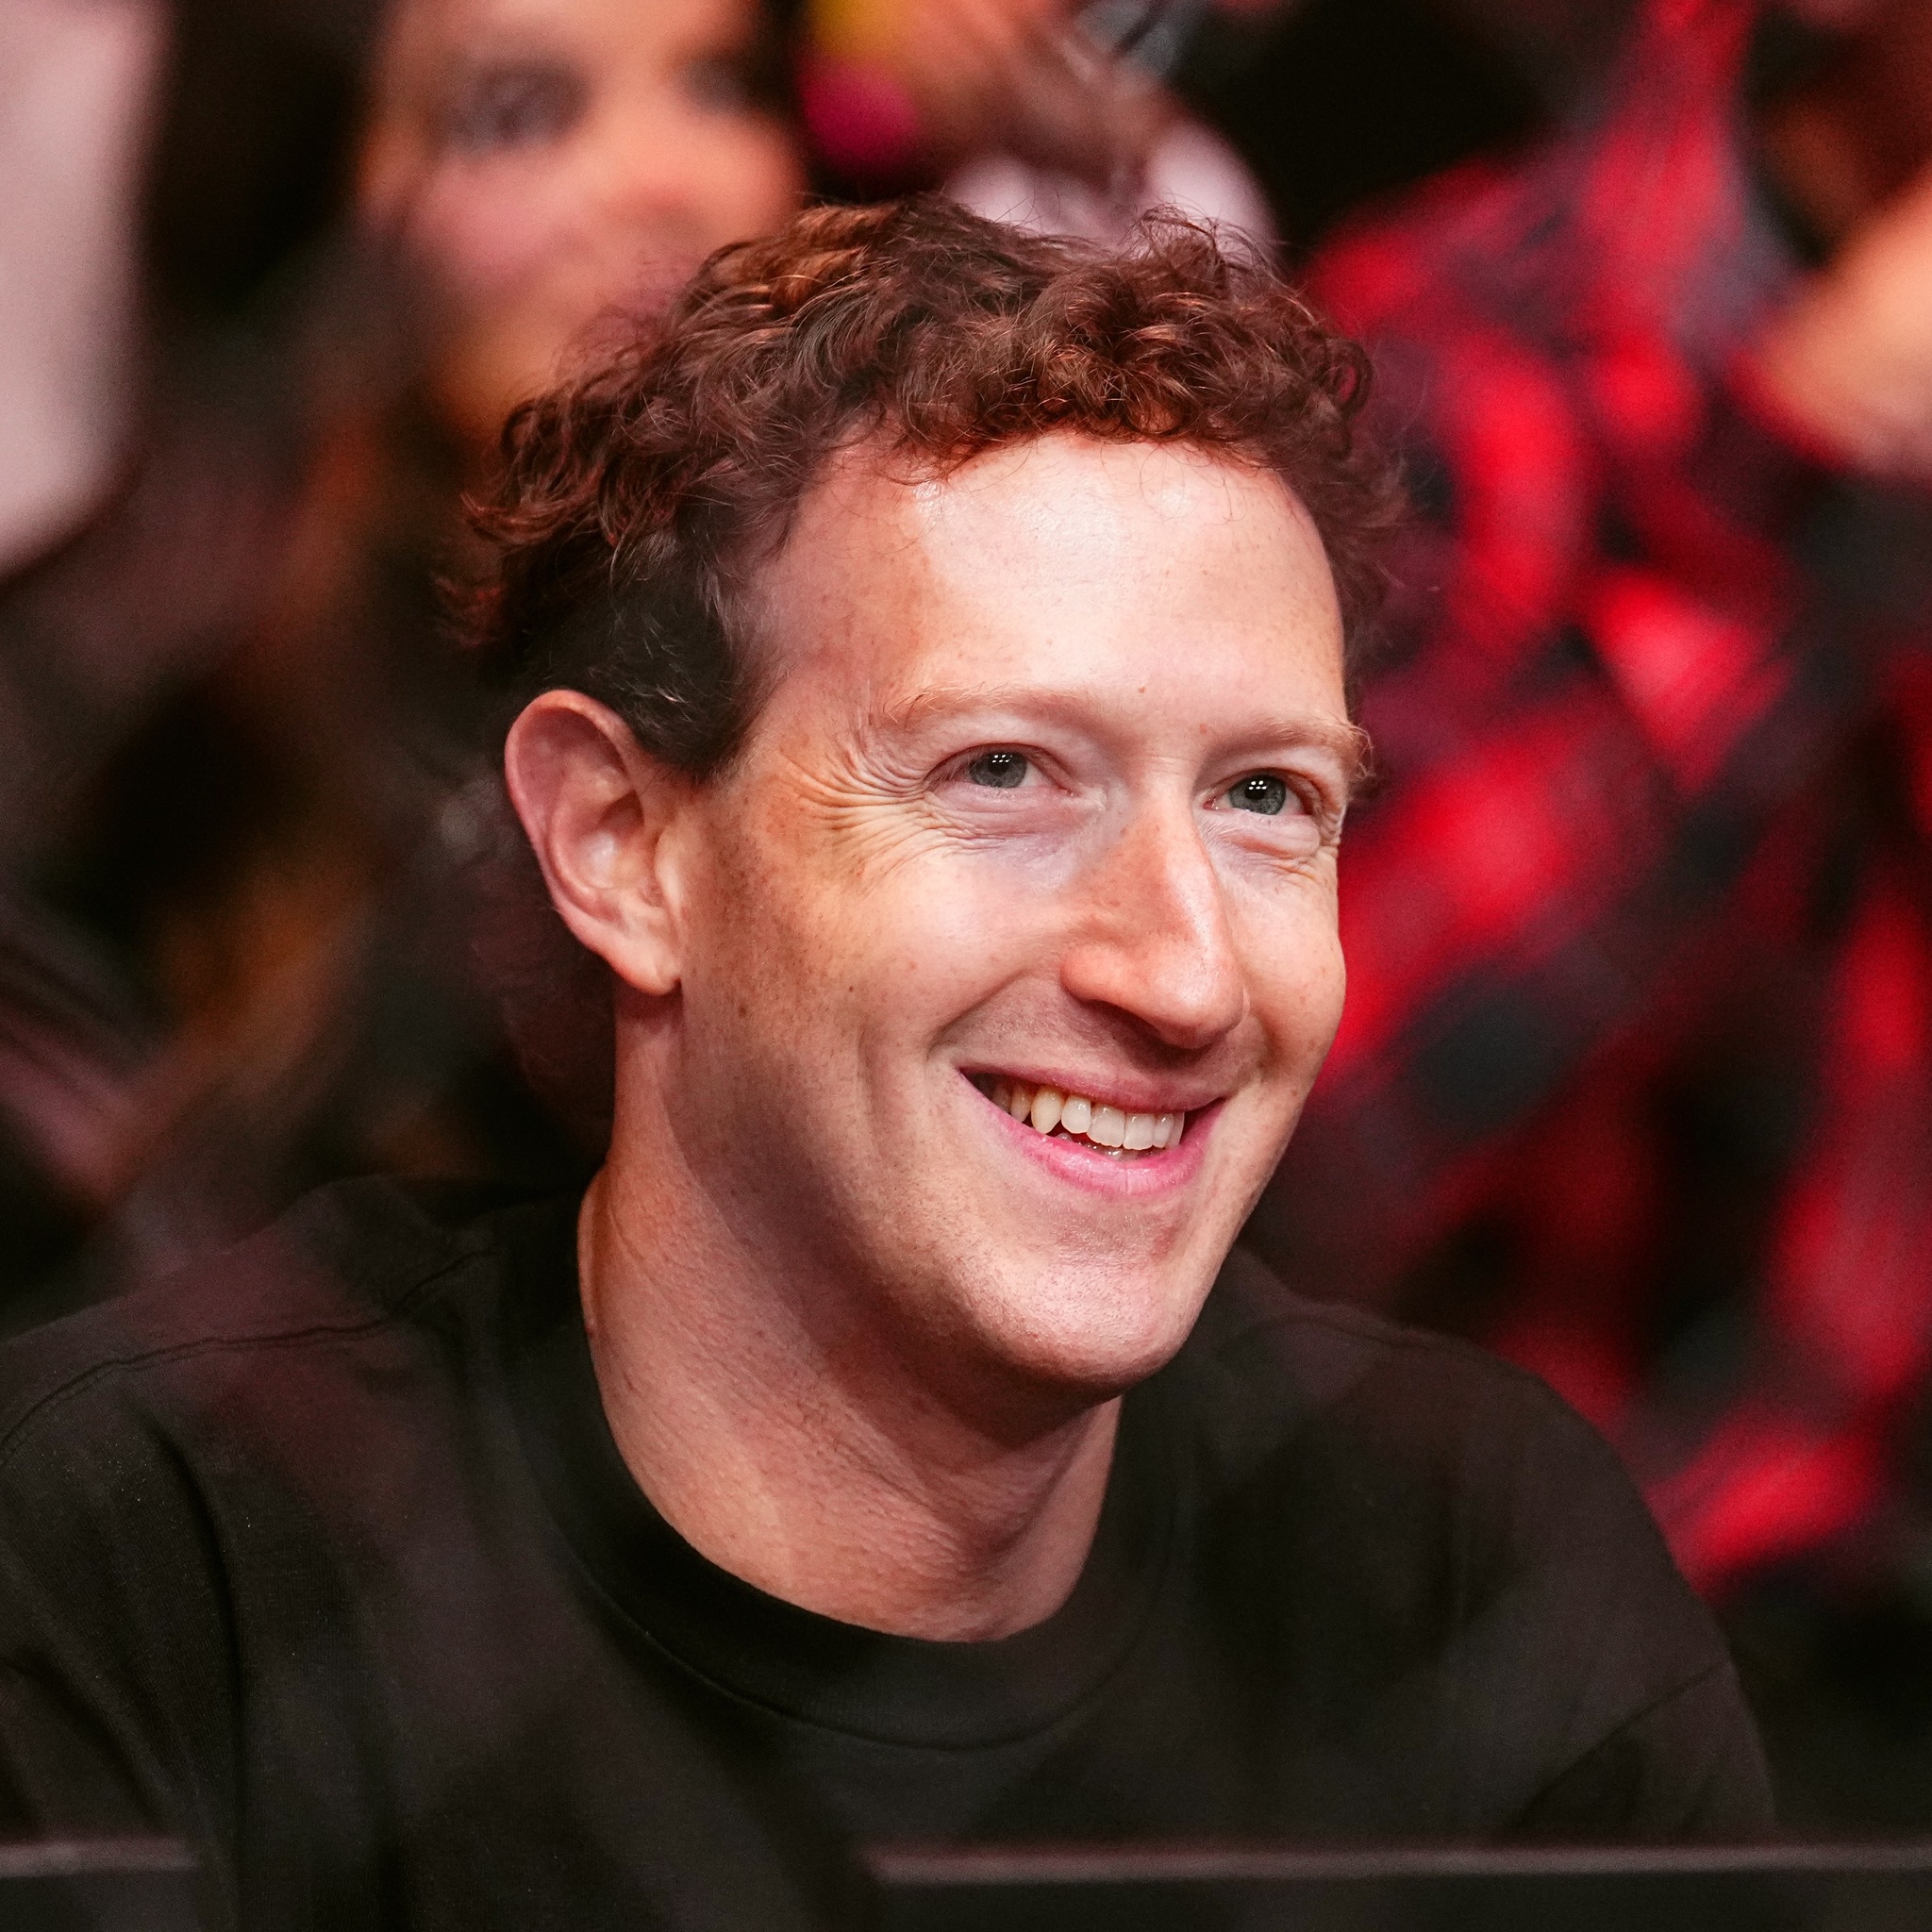 Mark Zuckerberg posts about new Meta AI assistant, open source Llama 3 AI model, web fans are excited